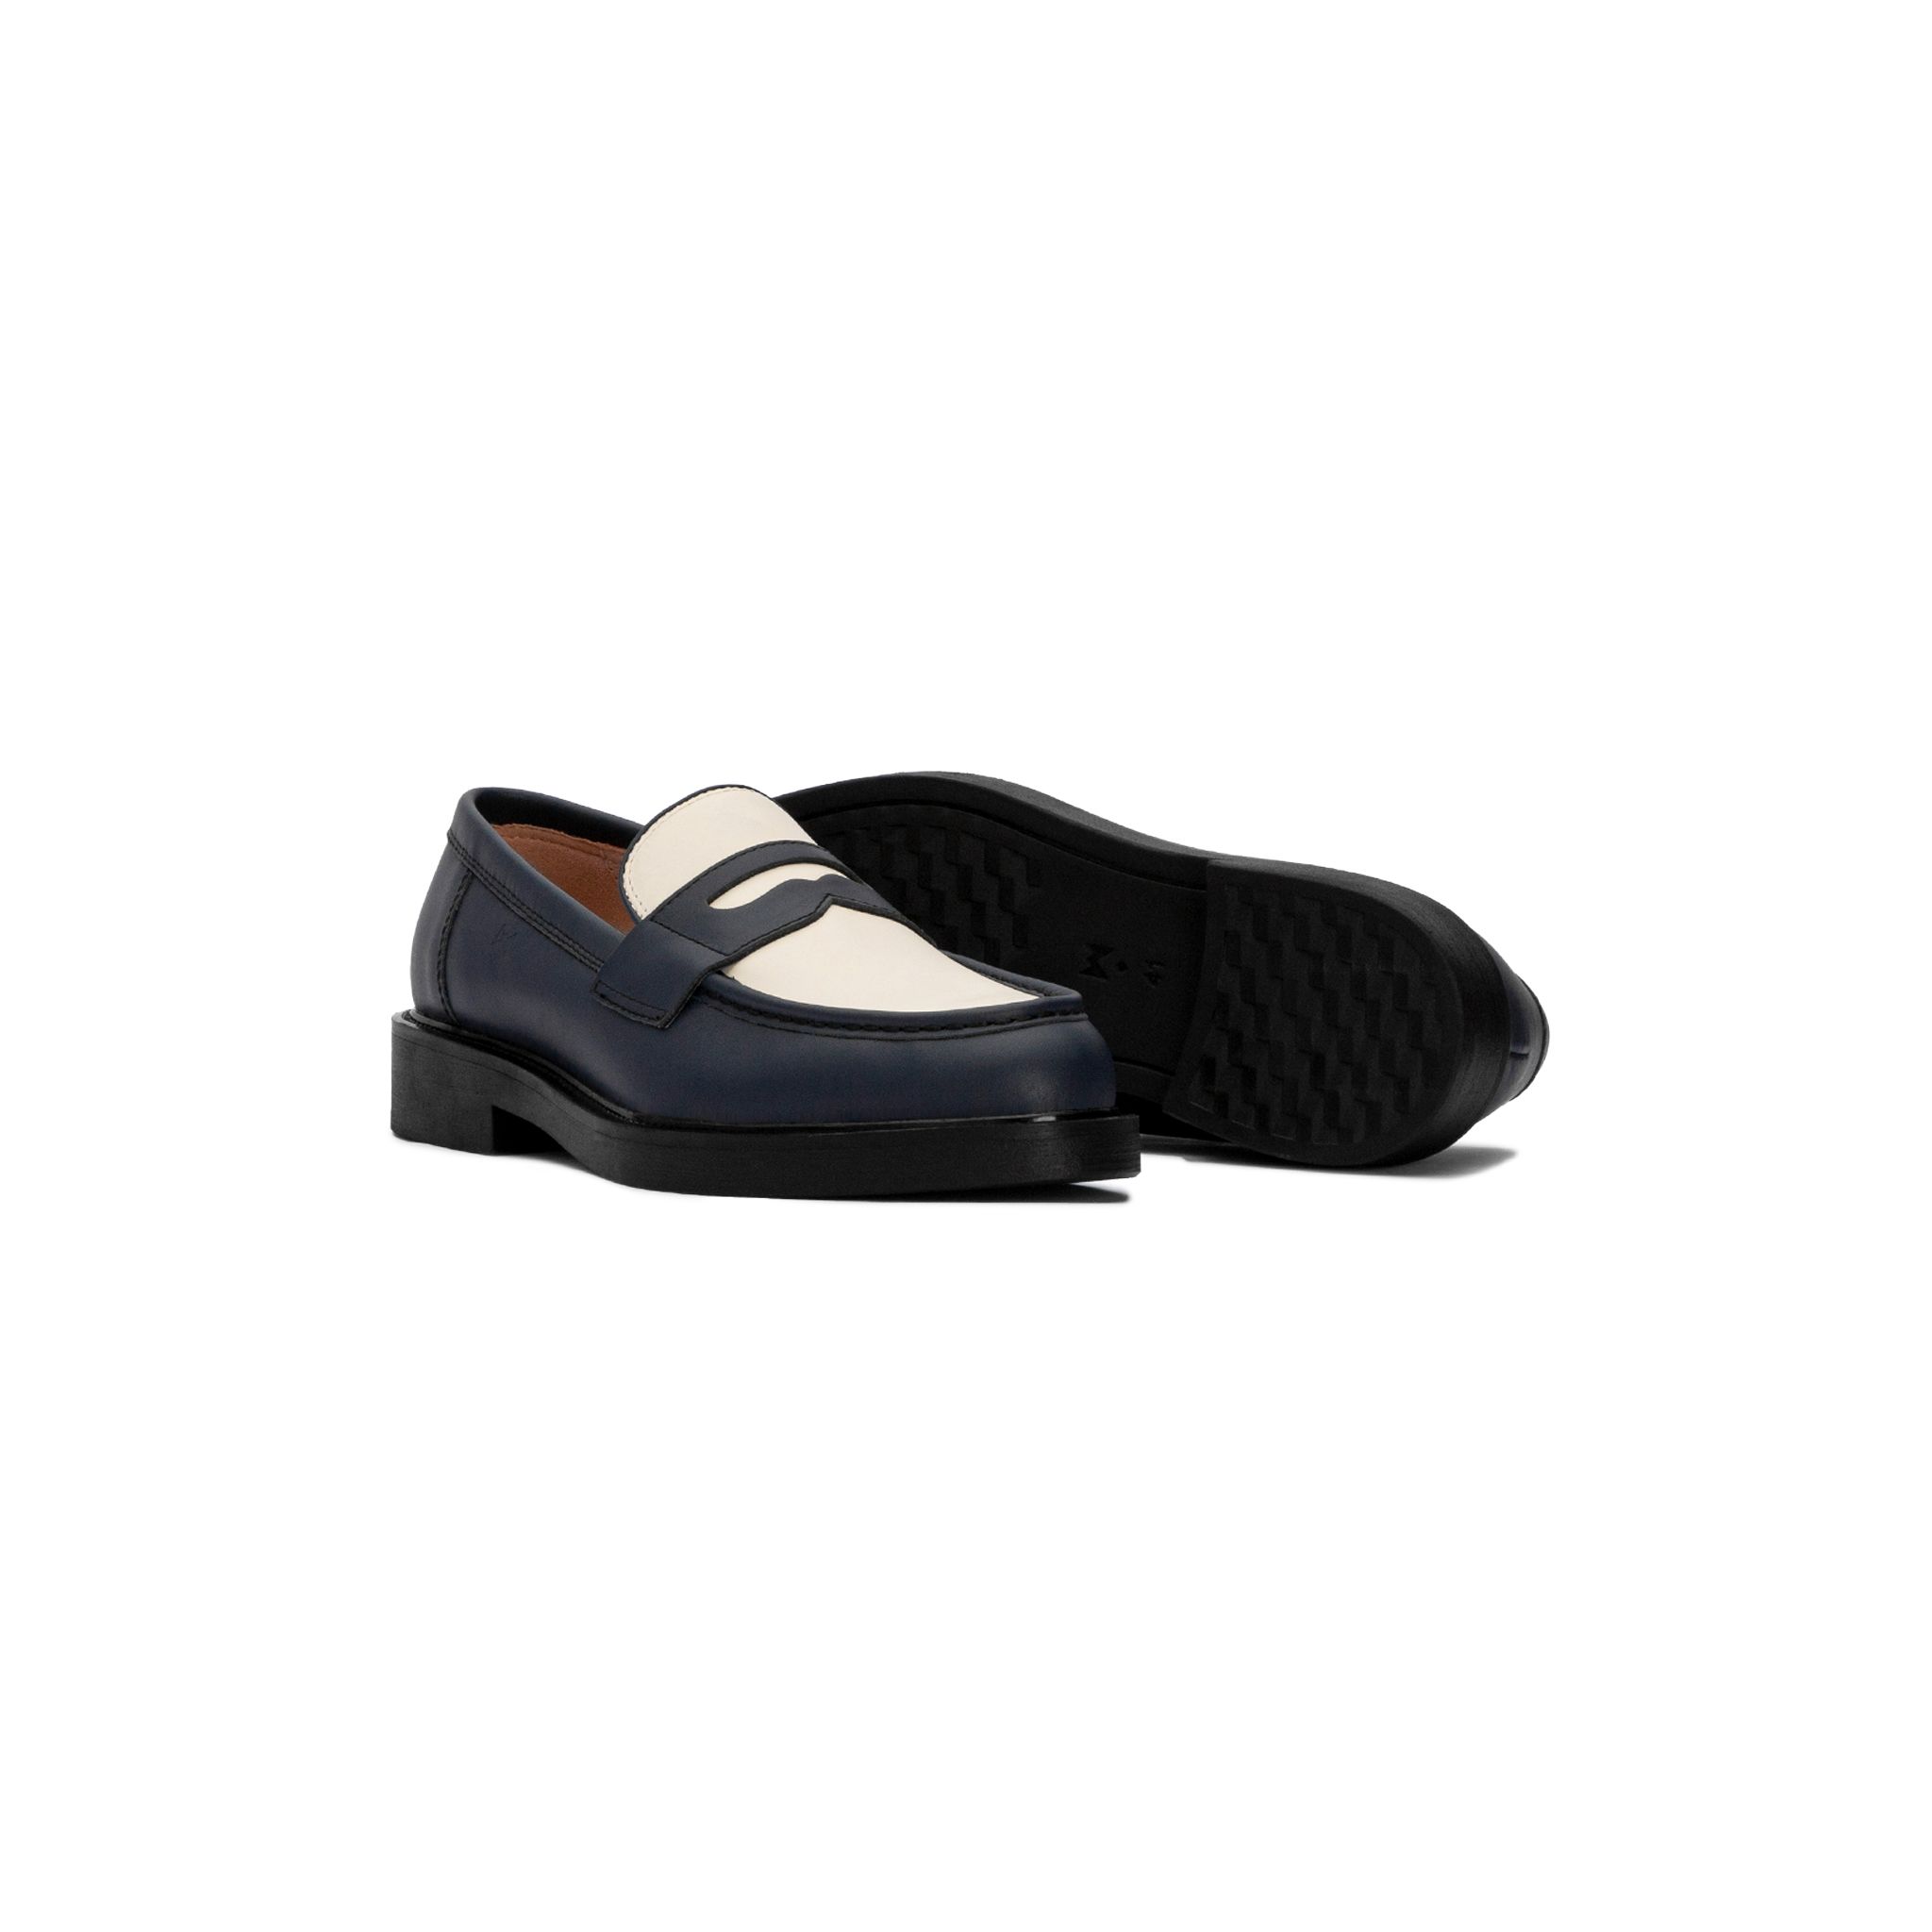  THE SEAN LADY WOLF PENNY LOAFER - NAVY BLUE & OFF WHITE 